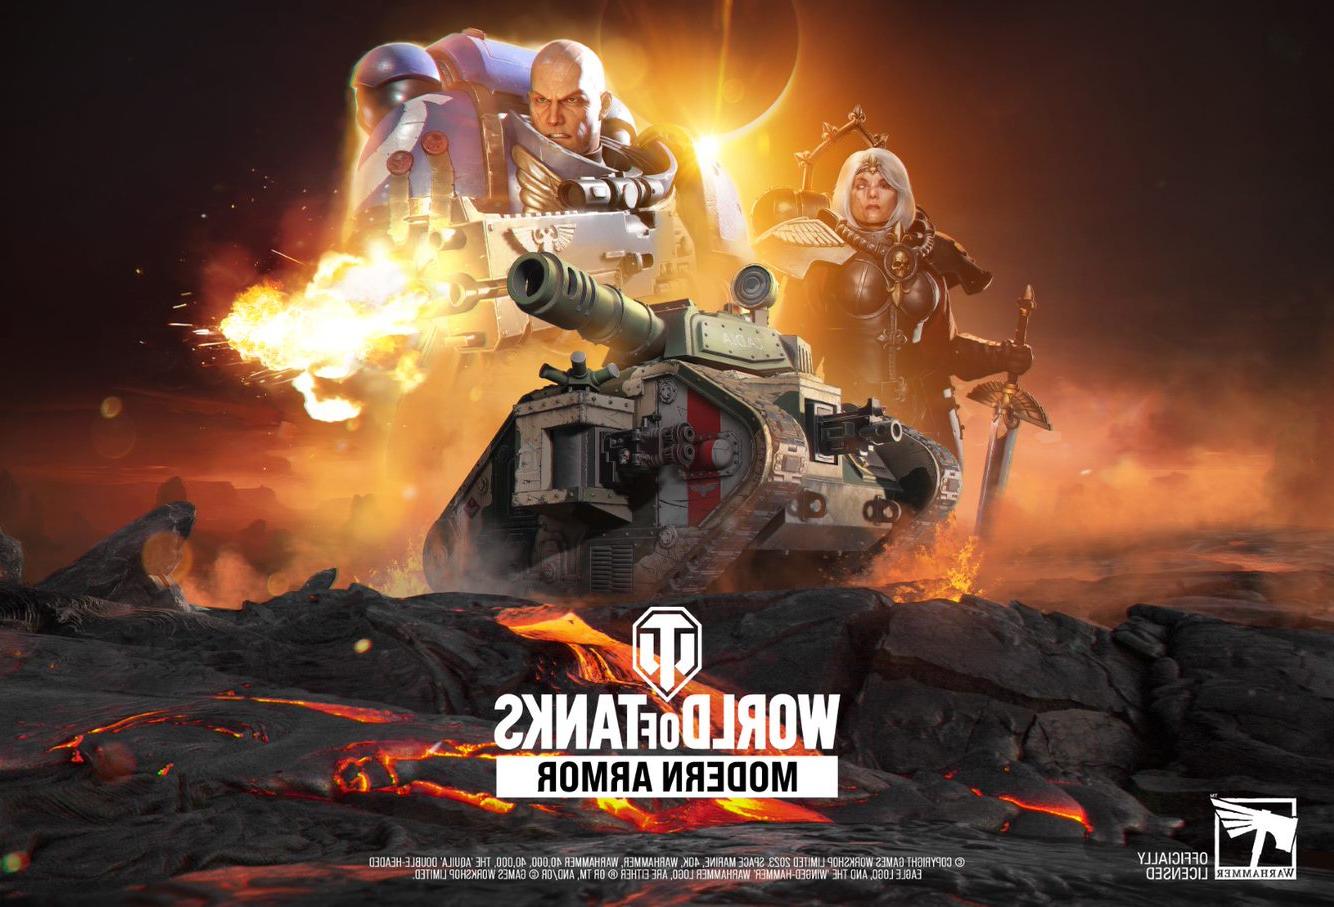 World of Tanks Modern Armor meets the New Gladiators season. A war of cosmic significance begins as the current epic season progresses. In the war, gladiators, a Warhammer 40,000 troops, and a modern weapons machine are renamed modern weapons. During this Empire-sized event, players can order new five Premium-Raums inspired by the Warhammer's 40,000 universe.